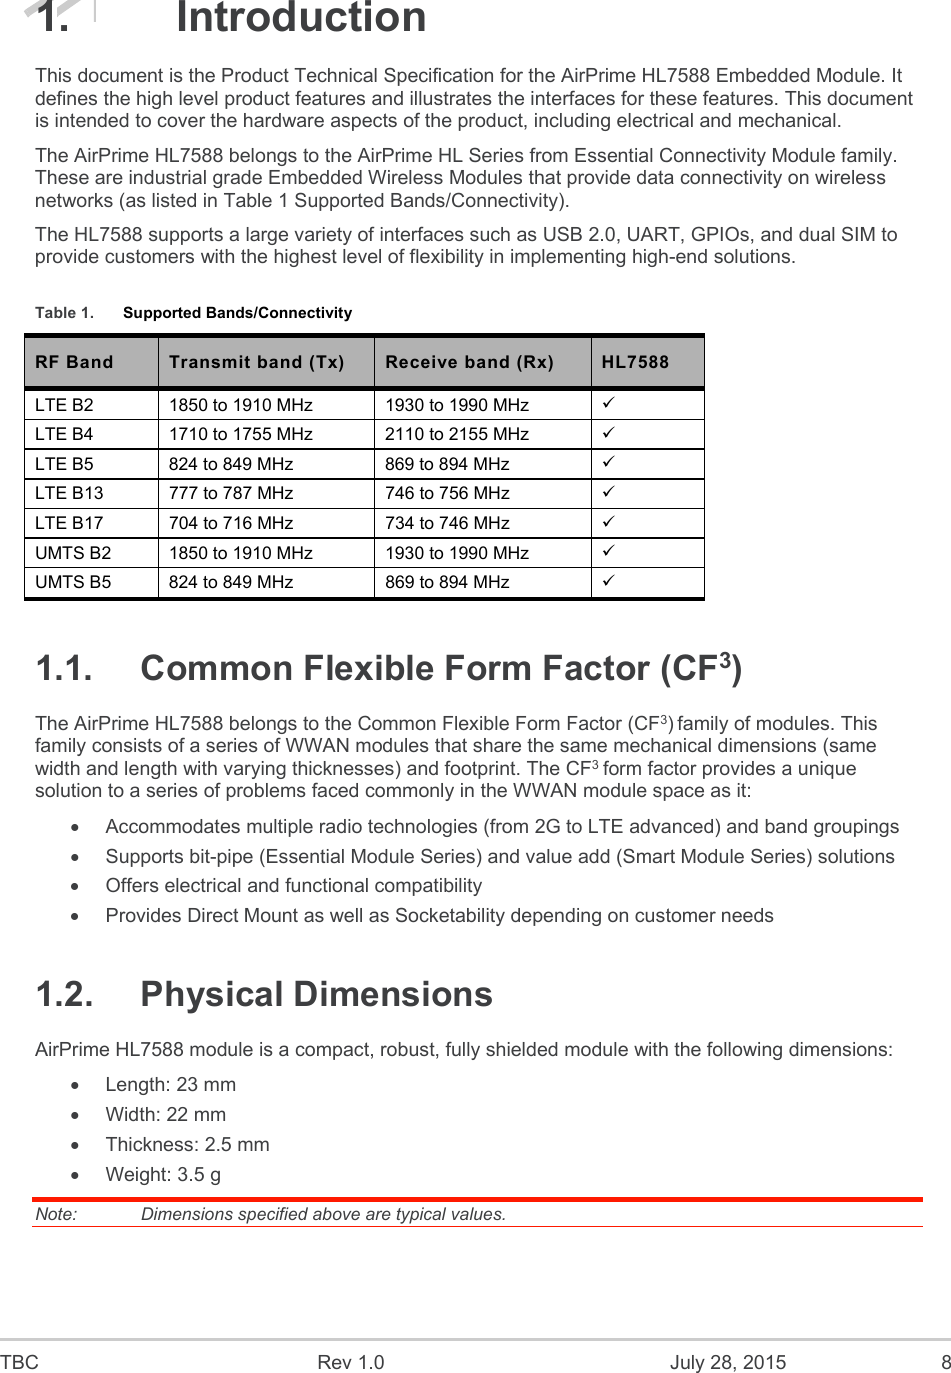  TBC  Rev 1.0  July 28, 2015  8 1.  Introduction This document is the Product Technical Specification for the AirPrime HL7588 Embedded Module. It defines the high level product features and illustrates the interfaces for these features. This document is intended to cover the hardware aspects of the product, including electrical and mechanical. The AirPrime HL7588 belongs to the AirPrime HL Series from Essential Connectivity Module family. These are industrial grade Embedded Wireless Modules that provide data connectivity on wireless networks (as listed in Table 1 Supported Bands/Connectivity).  The HL7588 supports a large variety of interfaces such as USB 2.0, UART, GPIOs, and dual SIM to provide customers with the highest level of flexibility in implementing high-end solutions. Table 1.  Supported Bands/Connectivity RF Band  Transmit band (Tx)  Receive band (Rx)  HL7588 LTE B2  1850 to 1910 MHz  1930 to 1990 MHz   LTE B4  1710 to 1755 MHz  2110 to 2155 MHz   LTE B5  824 to 849 MHz  869 to 894 MHz   LTE B13  777 to 787 MHz  746 to 756 MHz   LTE B17  704 to 716 MHz  734 to 746 MHz   UMTS B2  1850 to 1910 MHz  1930 to 1990 MHz   UMTS B5  824 to 849 MHz  869 to 894 MHz   1.1.  Common Flexible Form Factor (CF3)  The AirPrime HL7588 belongs to the Common Flexible Form Factor (CF3) family of modules. This family consists of a series of WWAN modules that share the same mechanical dimensions (same width and length with varying thicknesses) and footprint. The CF3 form factor provides a unique solution to a series of problems faced commonly in the WWAN module space as it:   Accommodates multiple radio technologies (from 2G to LTE advanced) and band groupings   Supports bit-pipe (Essential Module Series) and value add (Smart Module Series) solutions   Offers electrical and functional compatibility    Provides Direct Mount as well as Socketability depending on customer needs 1.2.  Physical Dimensions AirPrime HL7588 module is a compact, robust, fully shielded module with the following dimensions:   Length: 23 mm   Width: 22 mm   Thickness: 2.5 mm   Weight: 3.5 g Note:   Dimensions specified above are typical values. 